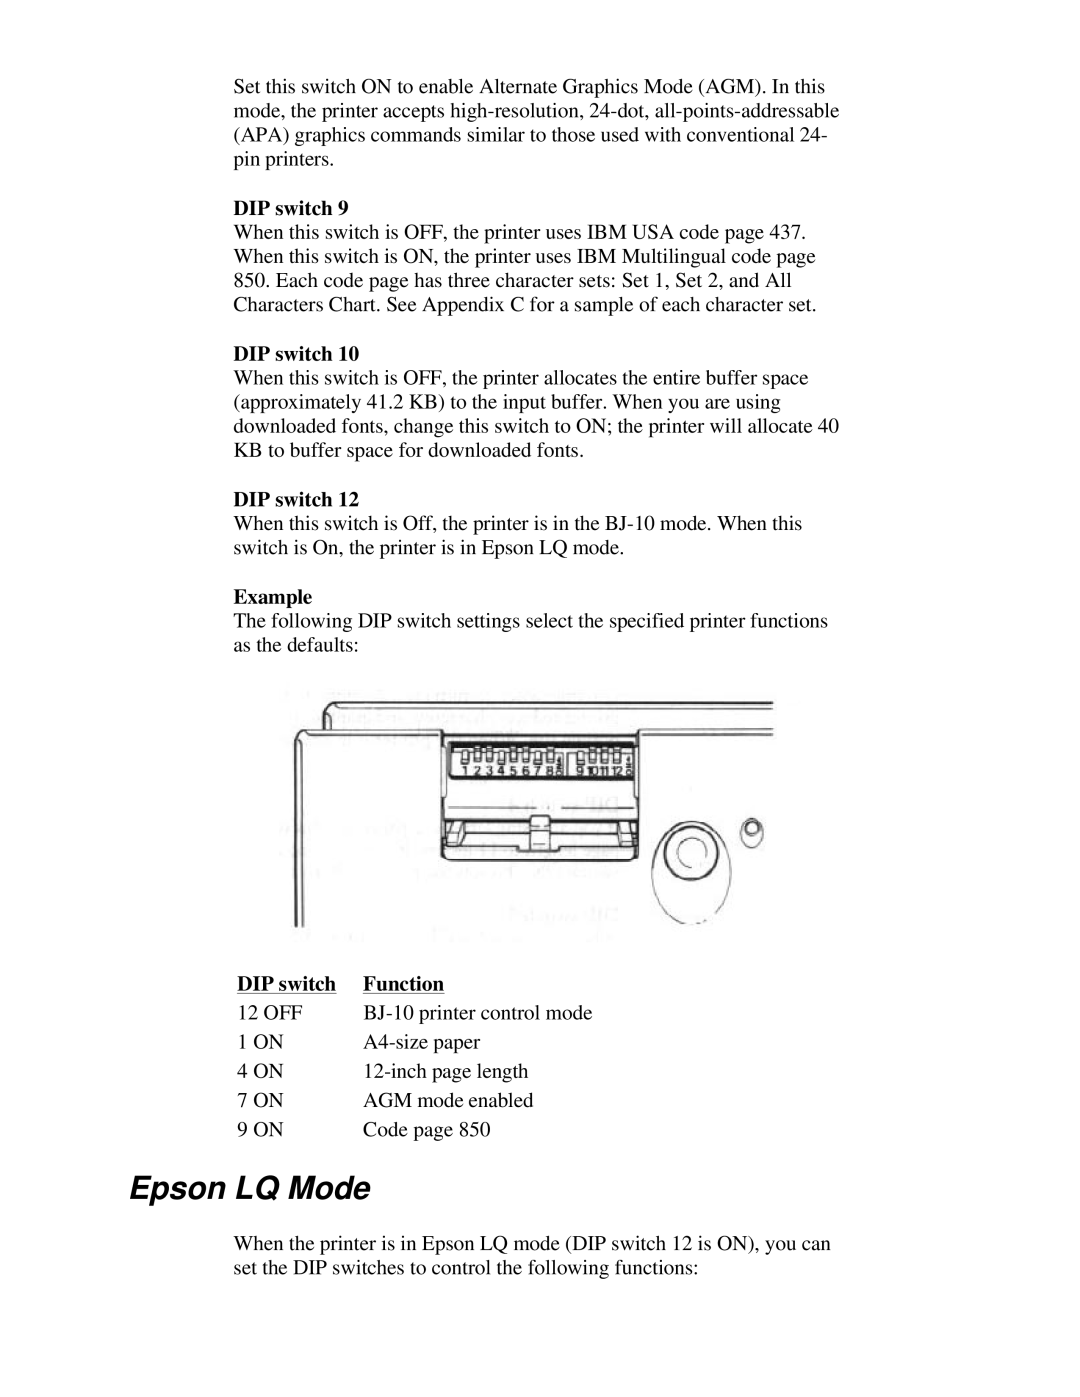 Canon BJ-230 user manual Epson LQ Mode, Example, DIP switch, Function 